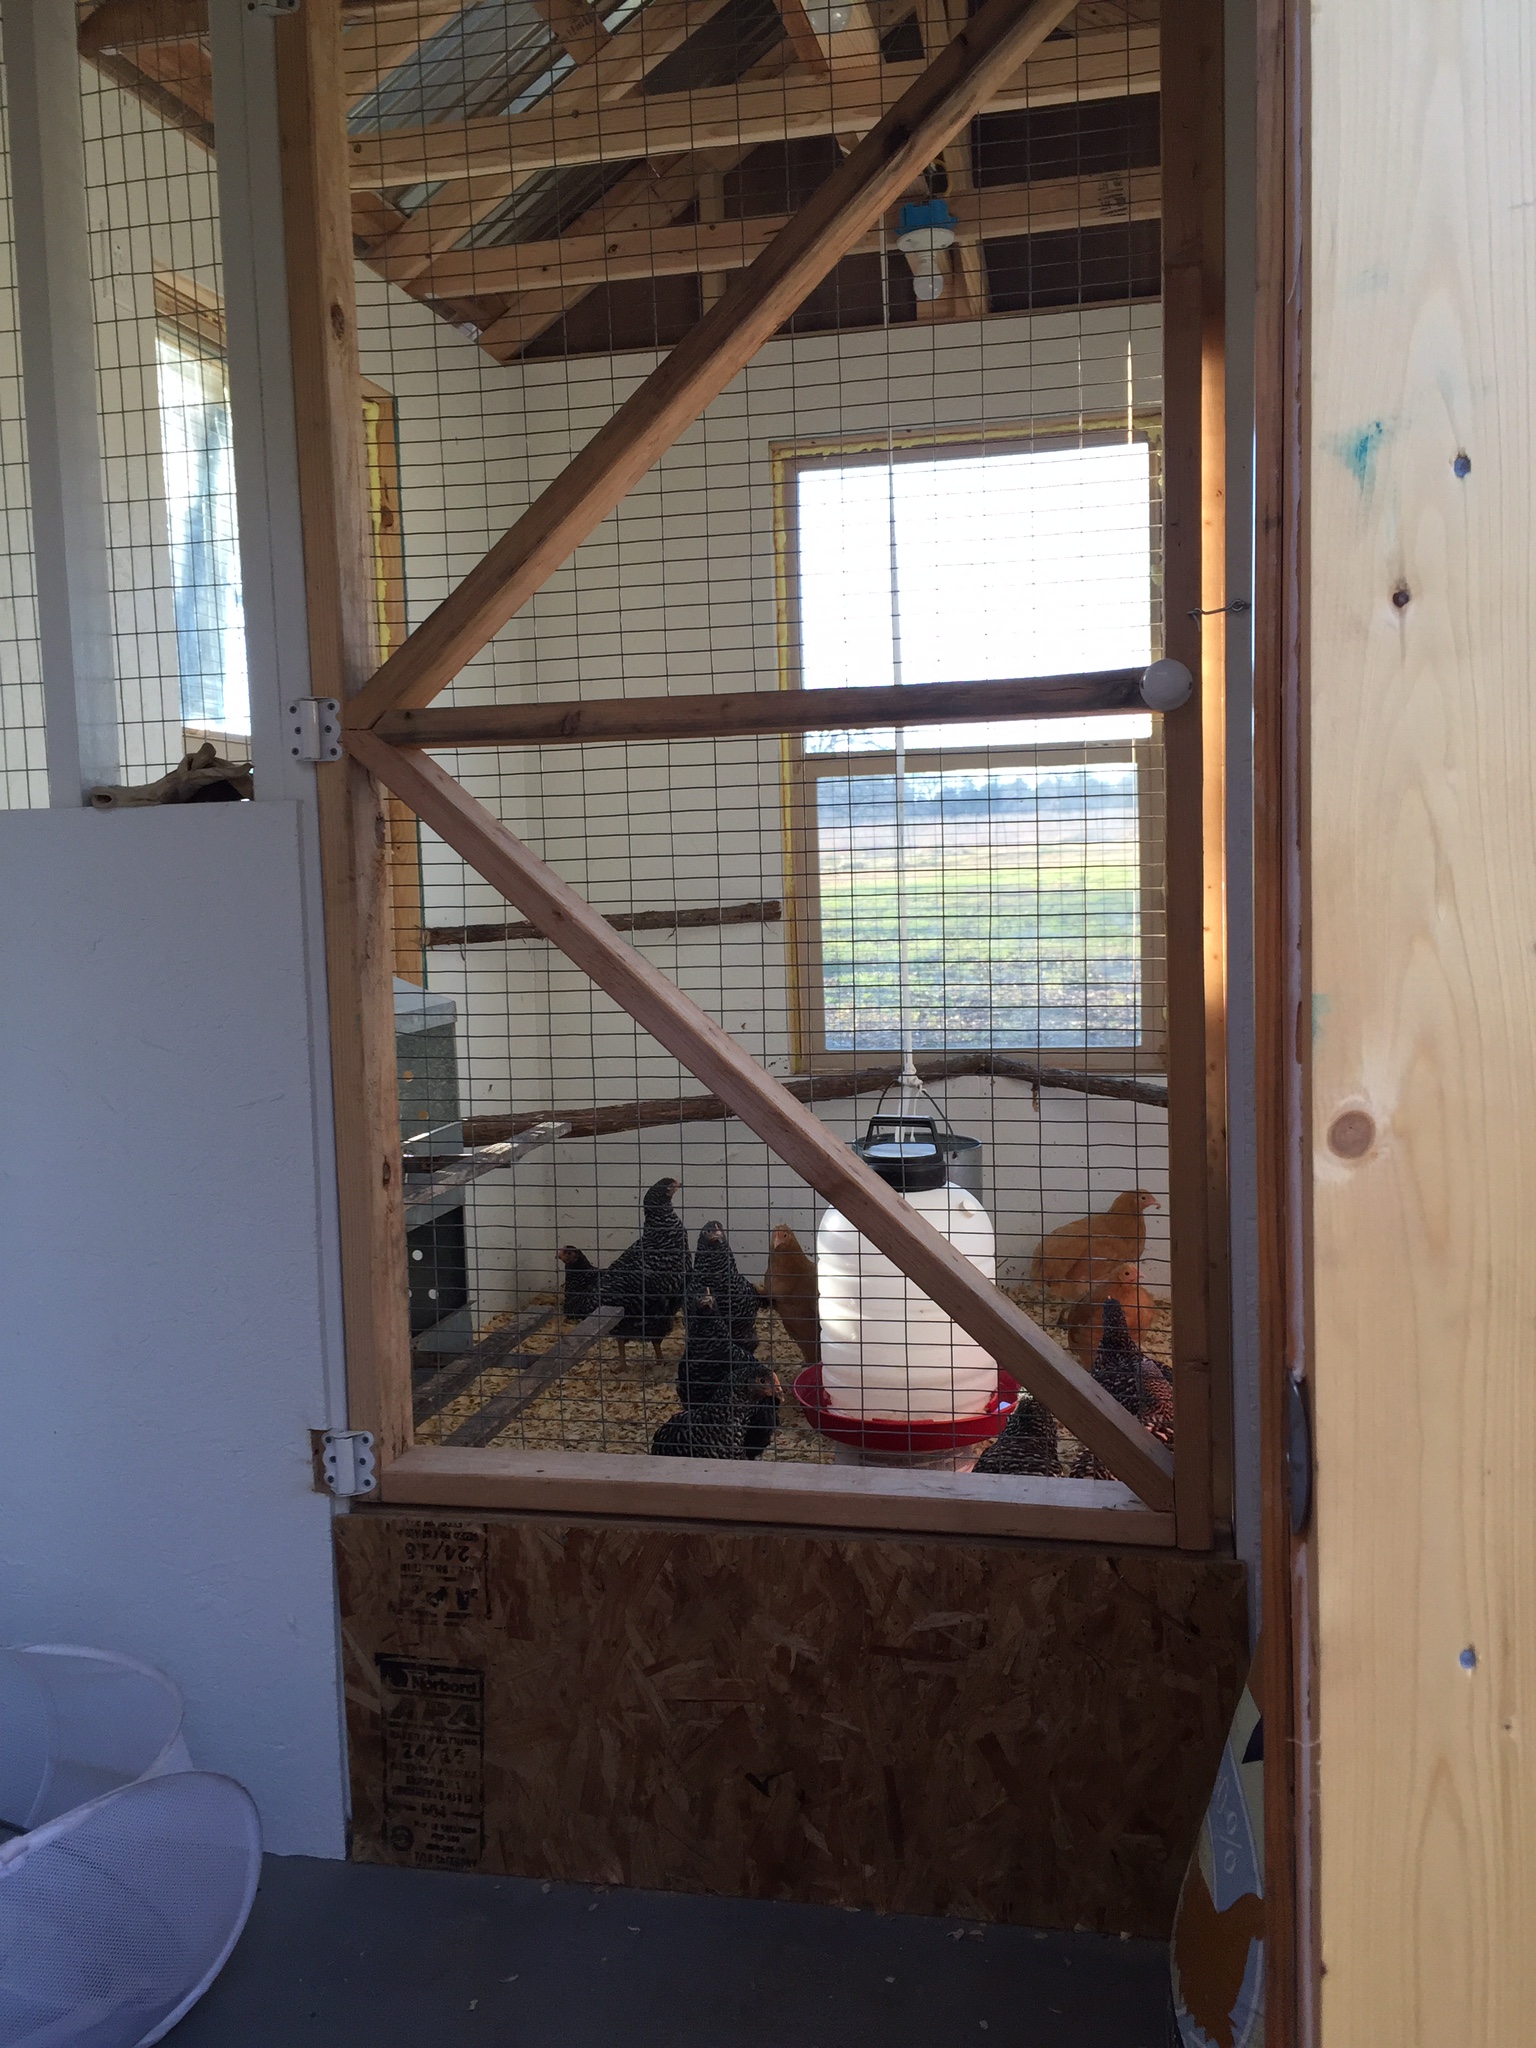 Interior gate separating the chicken from the feed and supplies.